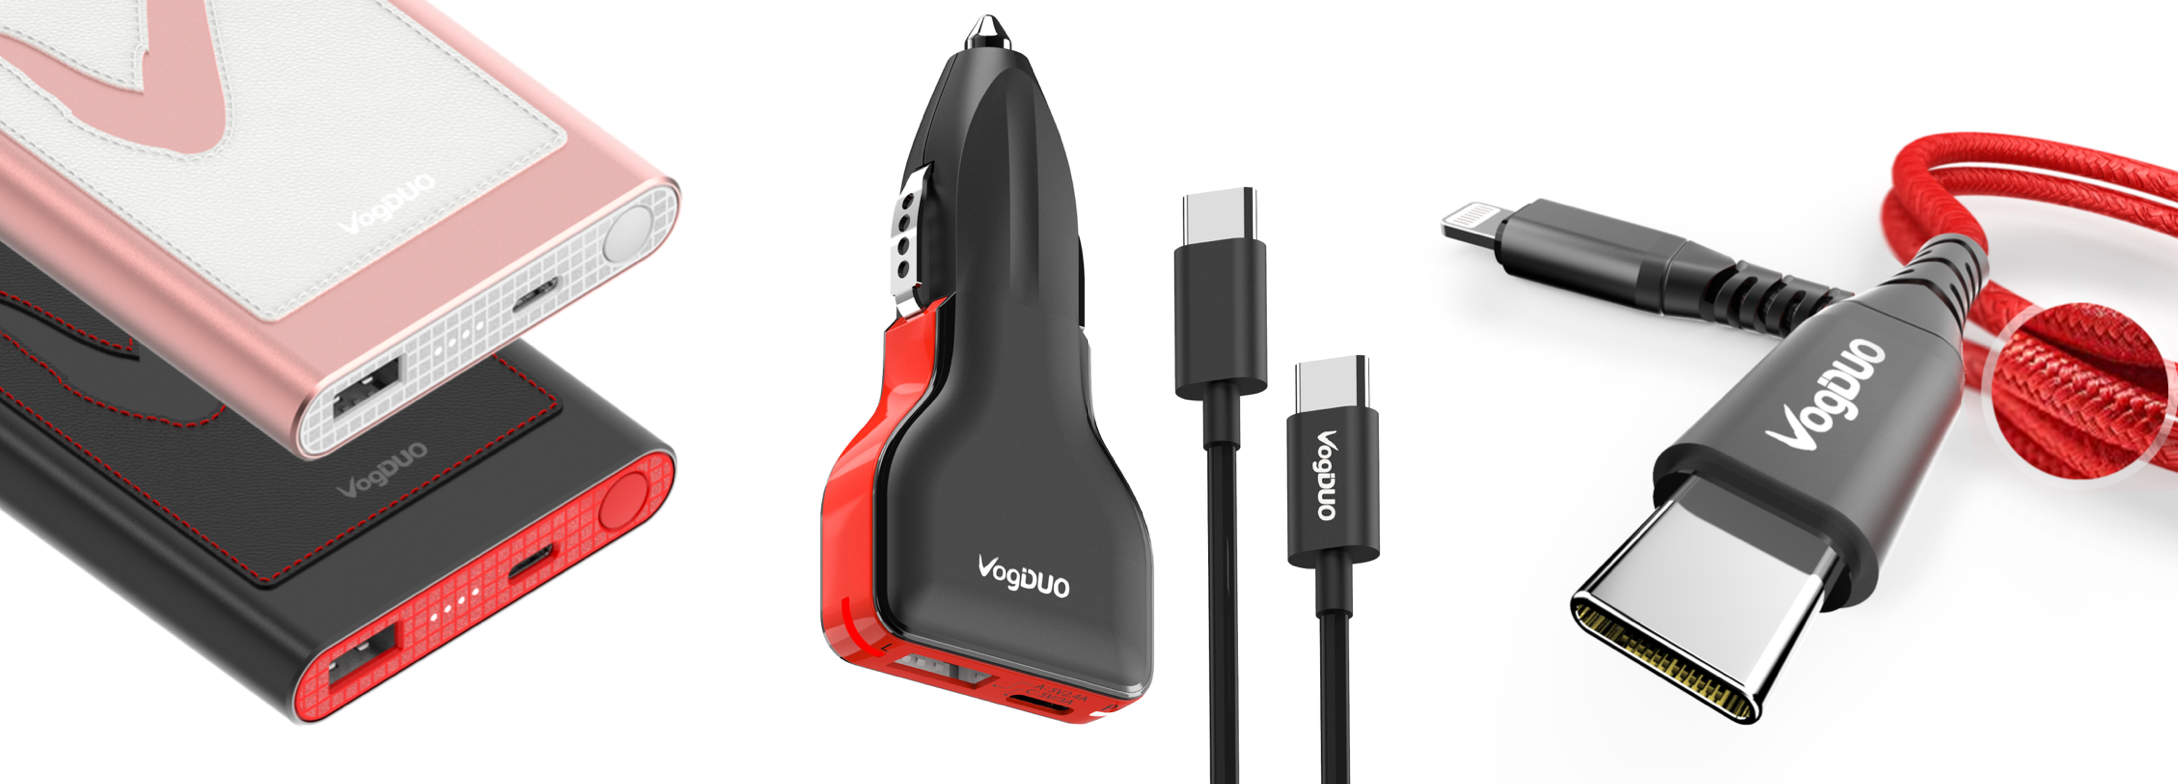 VogDUO had the entire USB-C PD charging solutions/ chargers for your new smart phone.